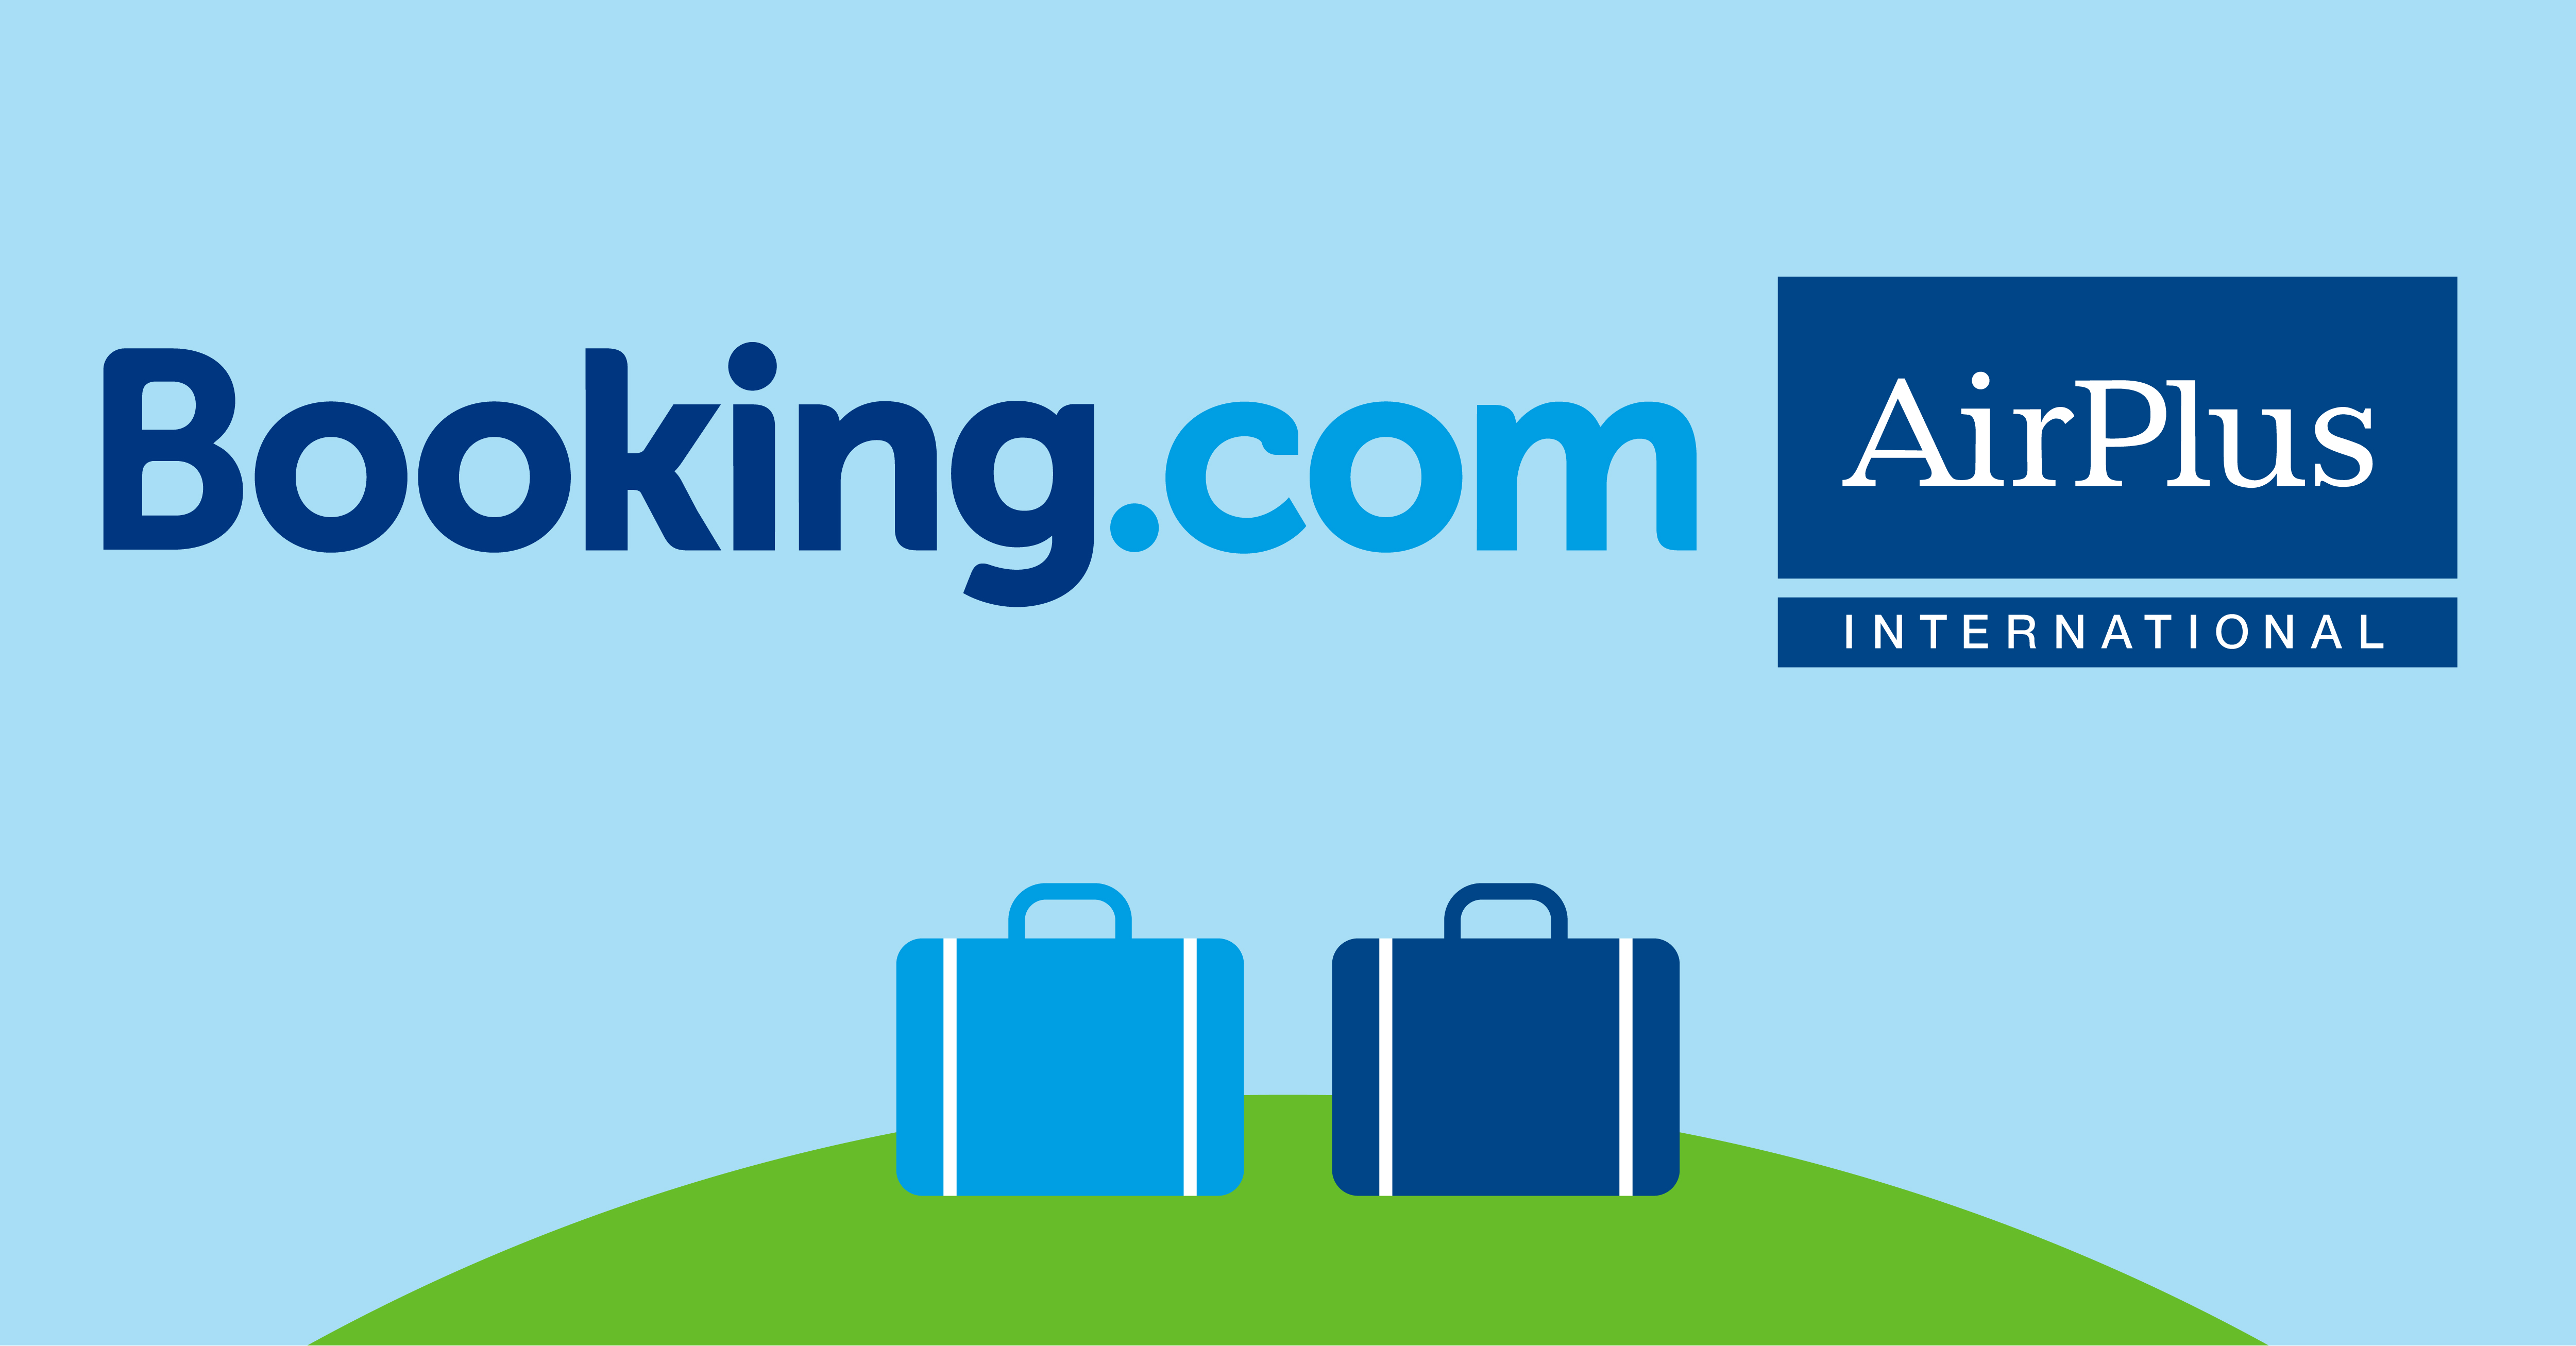 Airplus intègre Booking.com for Business